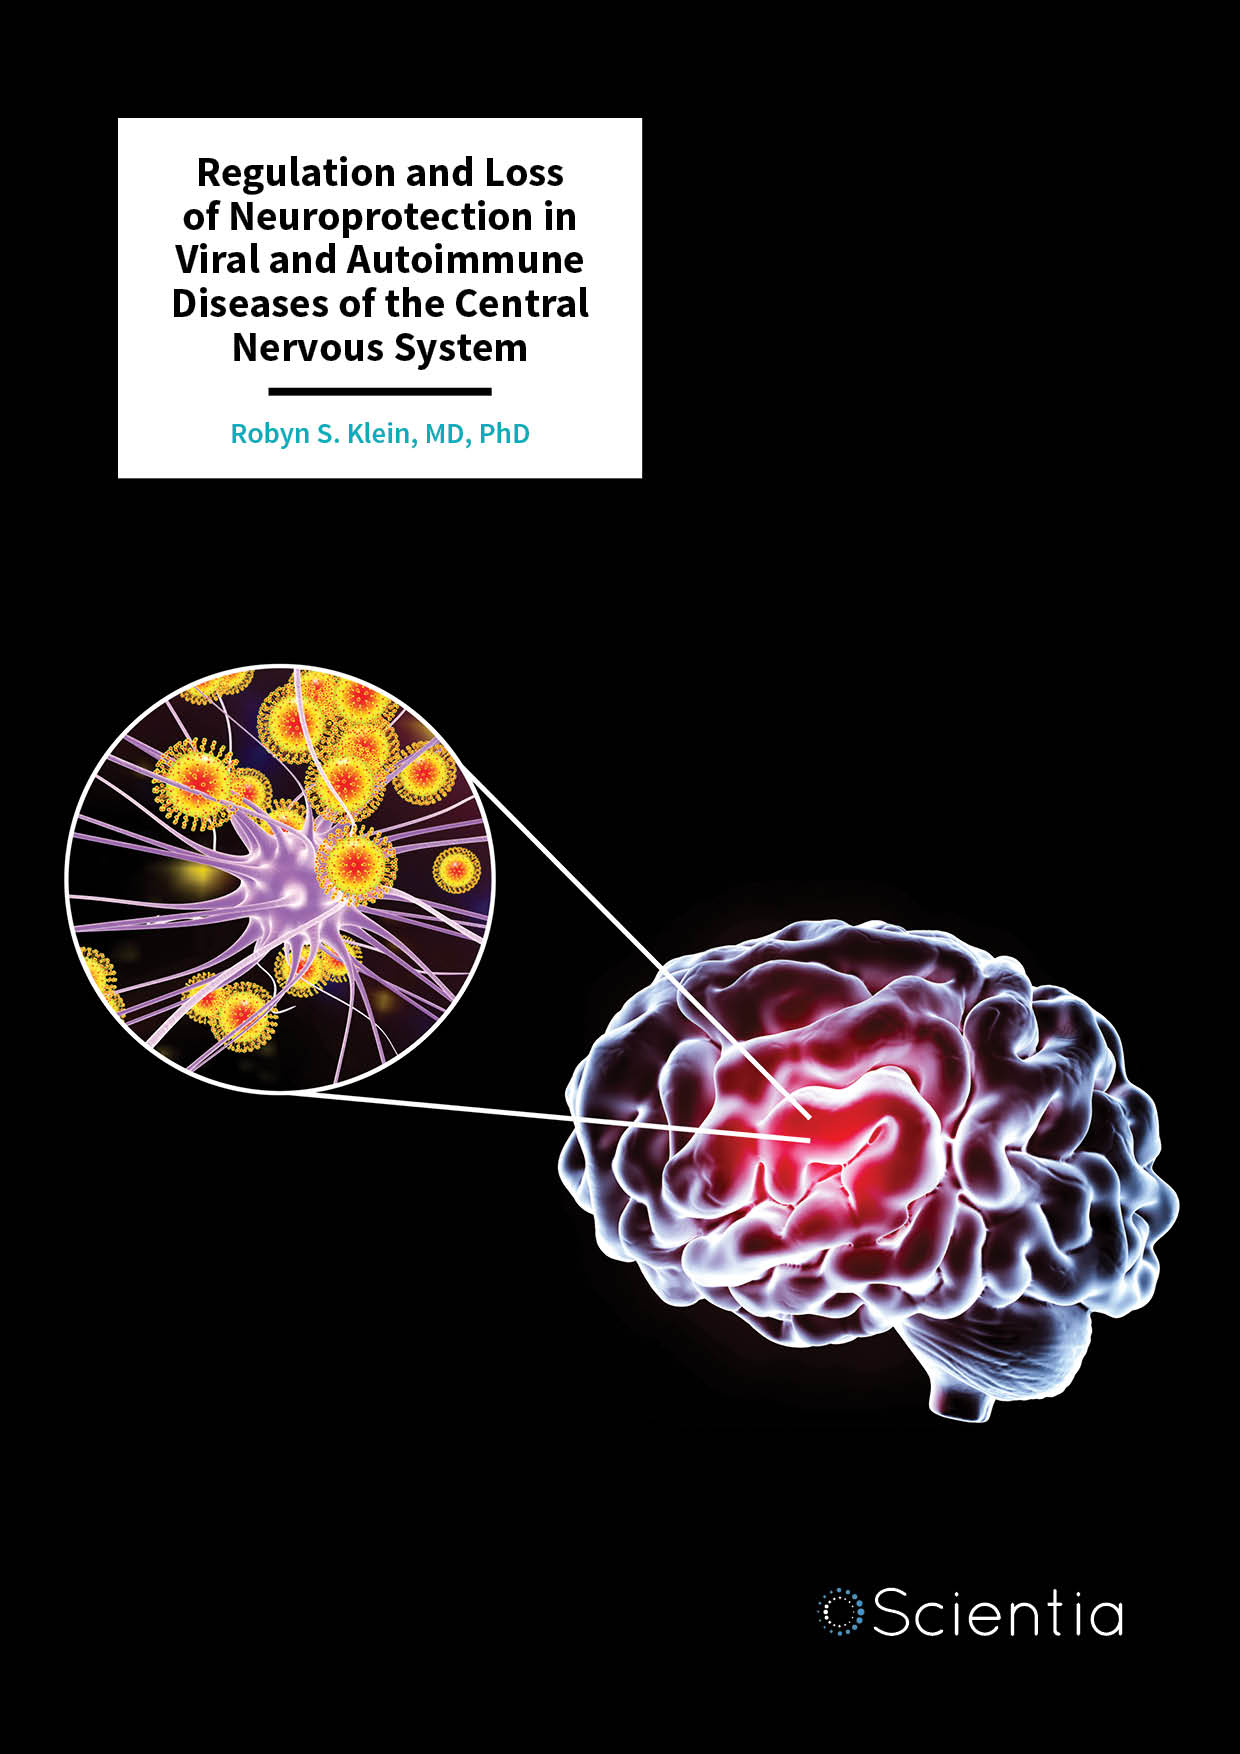 Dr Robyn S. Klein – Regulation and Loss of Neuroprotection in Viral and Autoimmune Diseases of the Central Nervous System